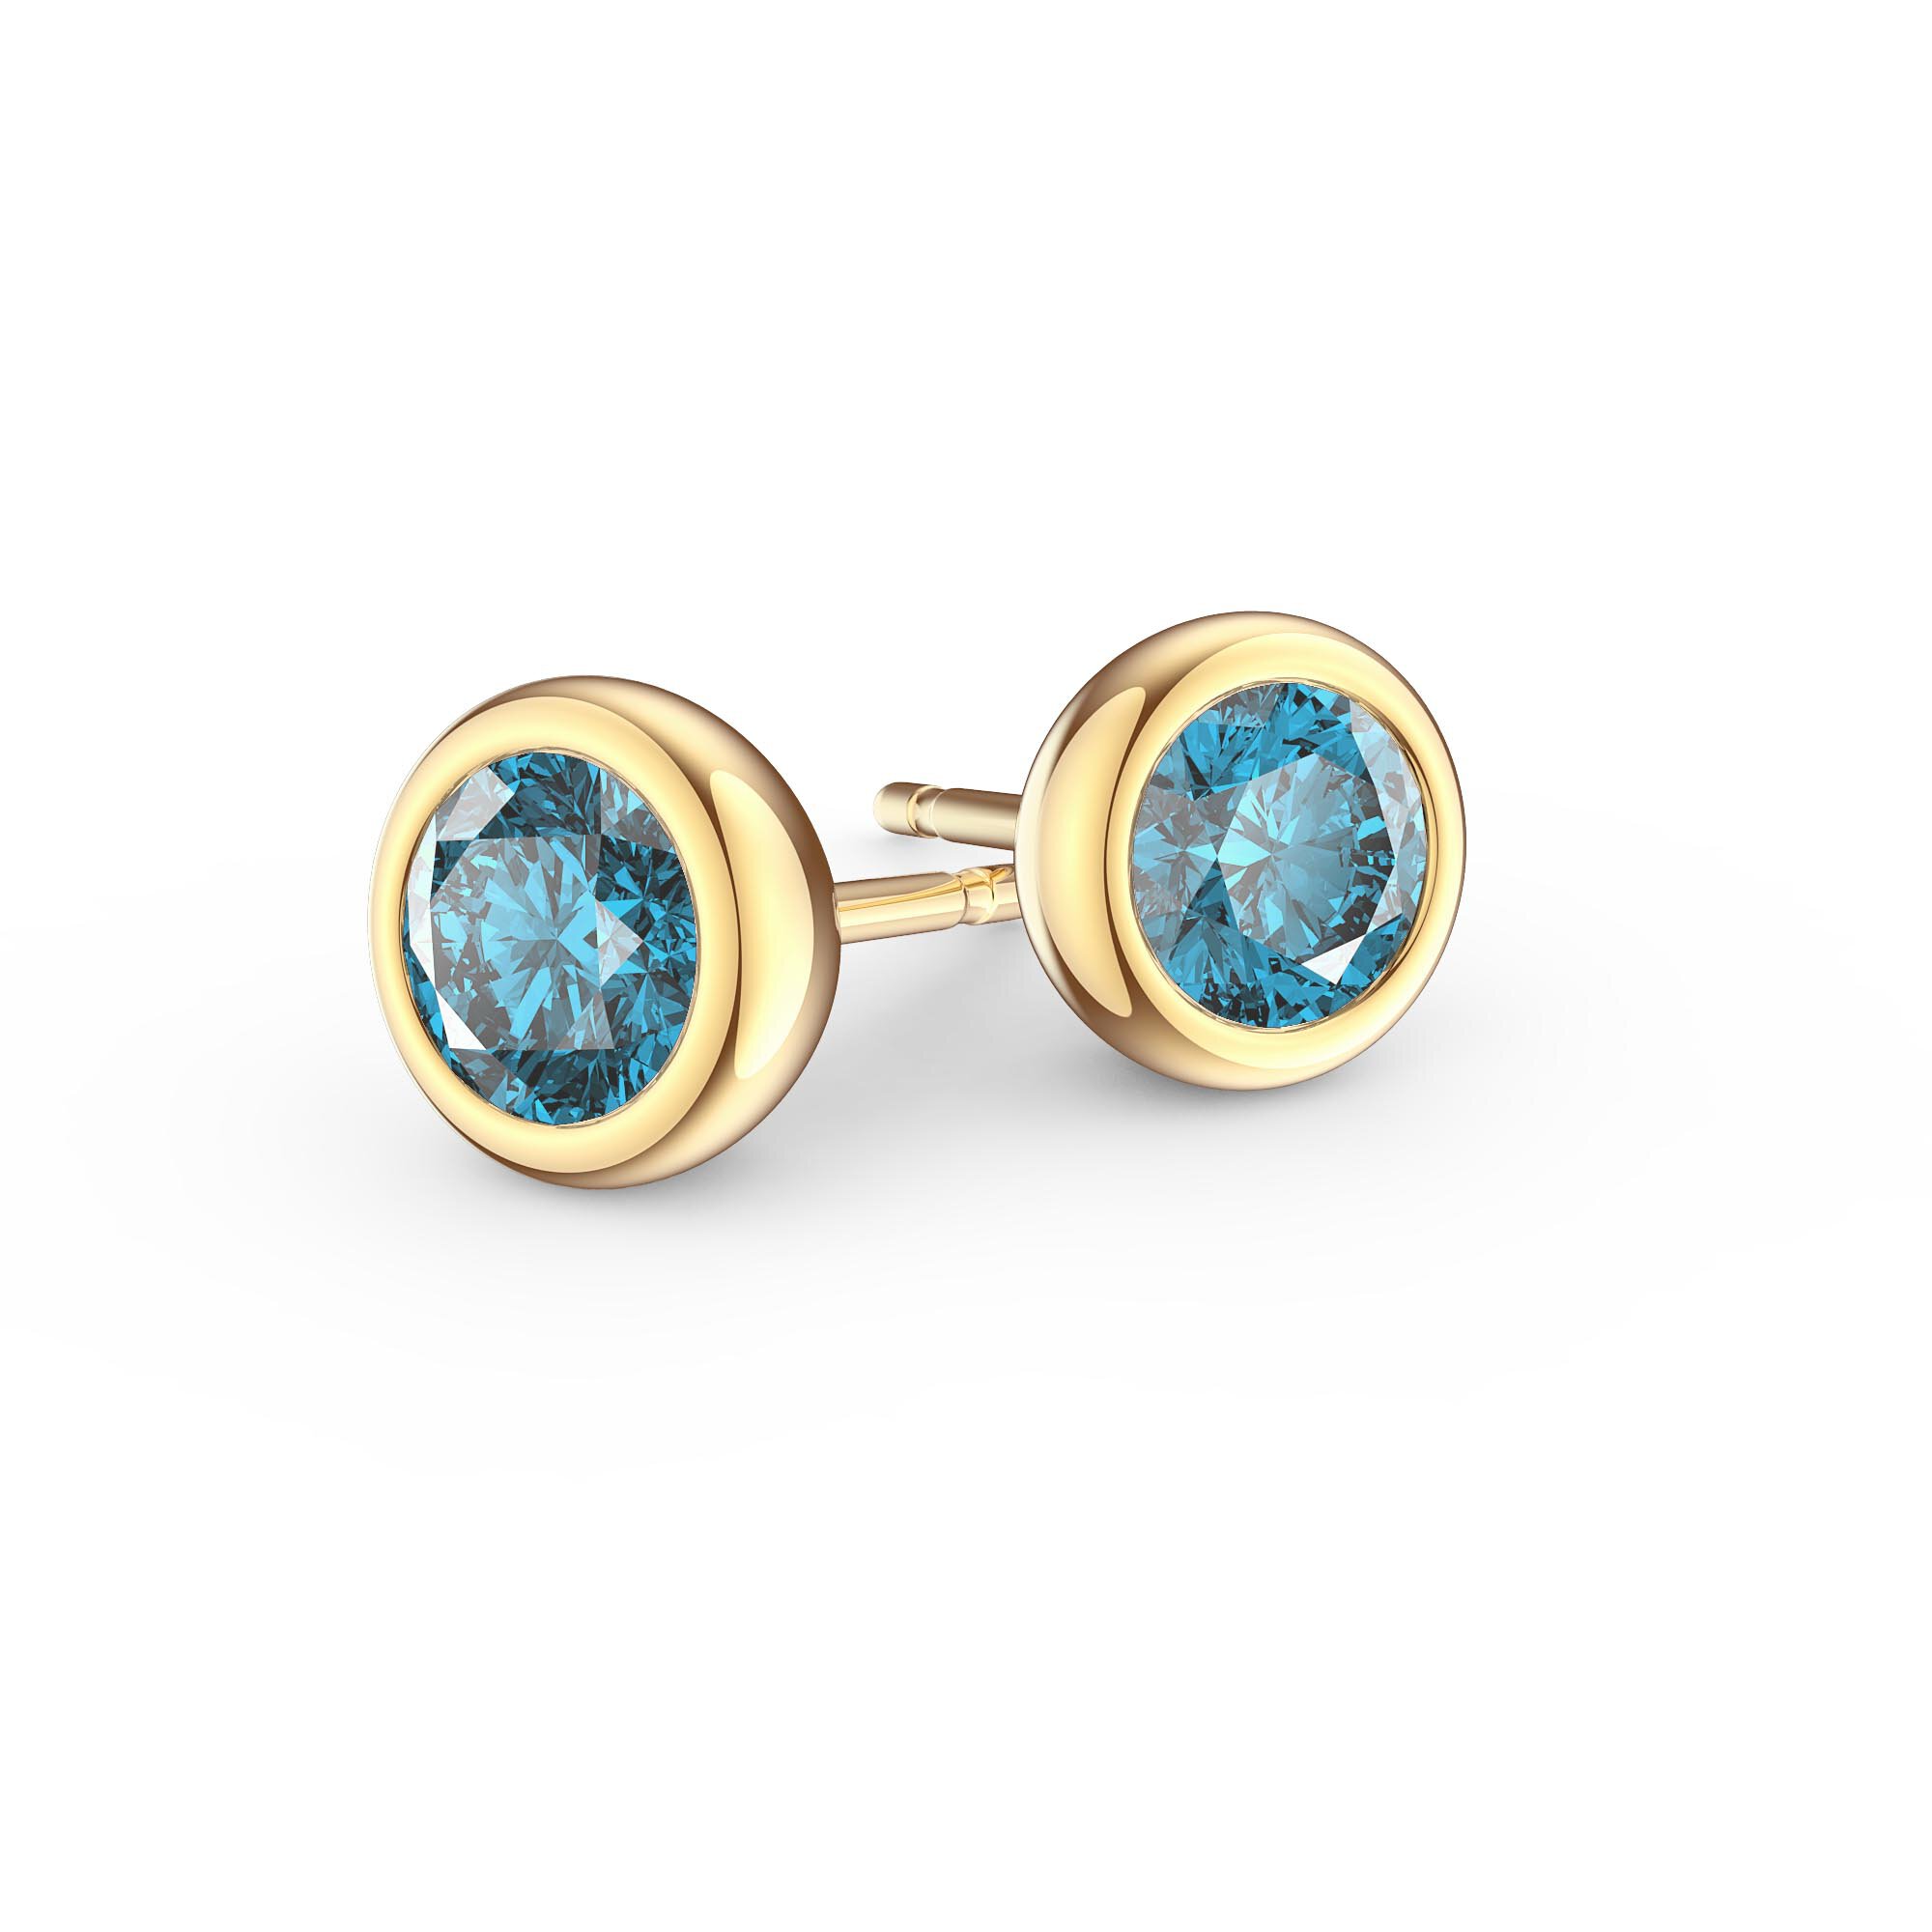 9ct Gold London Blue Topaz Studs Round earrings Made in UK